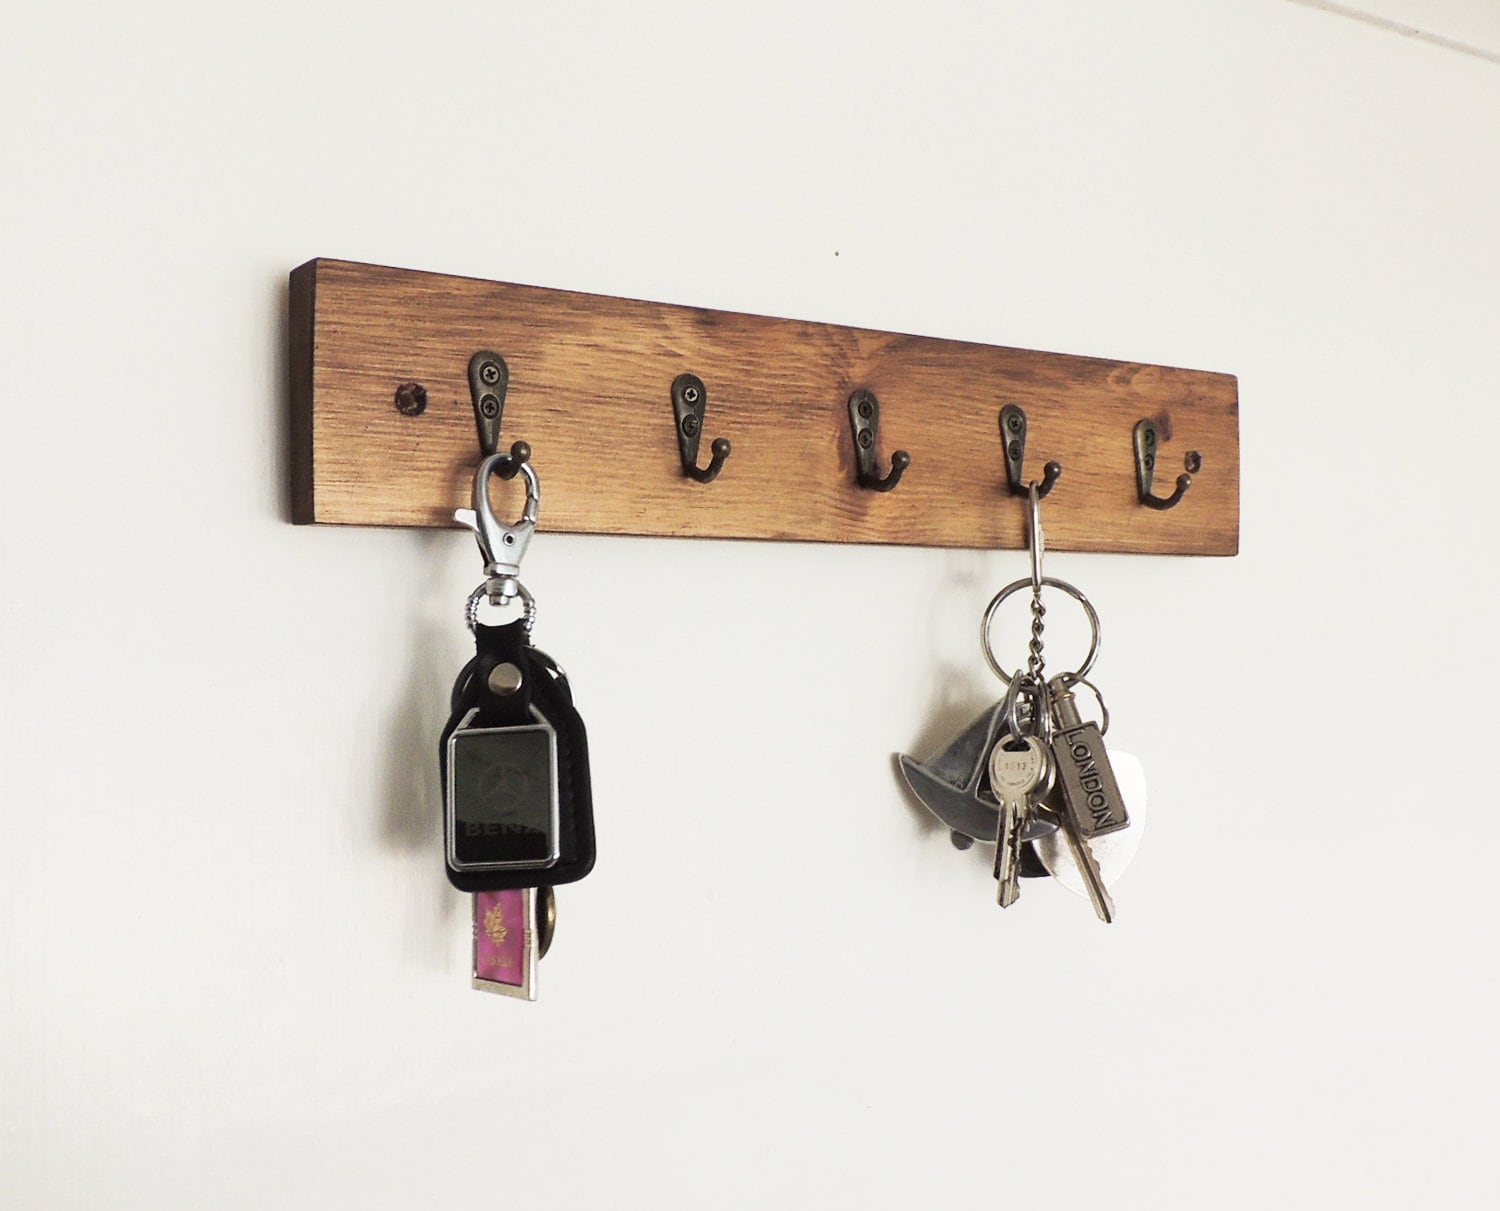 Shop For Best Key Holders For Your Homes Online | LBB